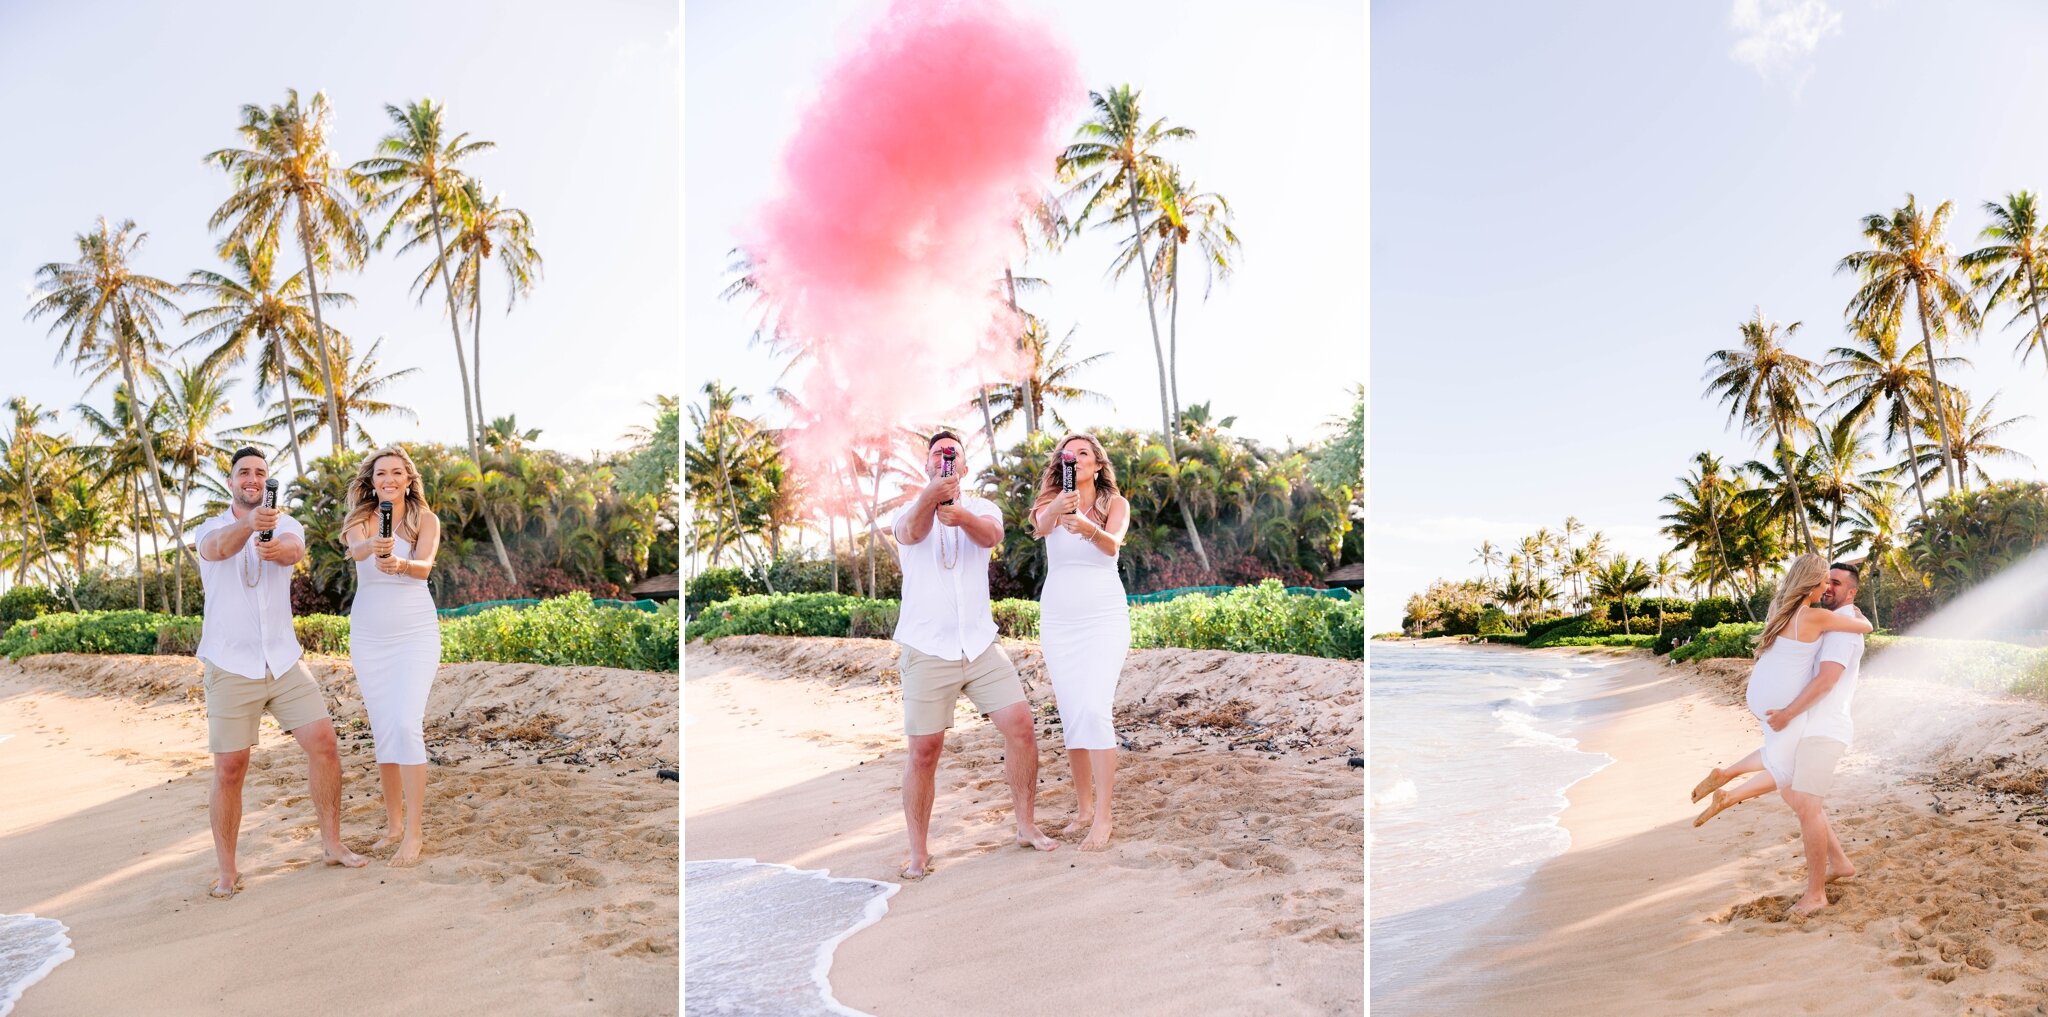 Gender Reveal Party with Luxury Picnic at Waialae Beach Park - Oahu Maternity Photographer